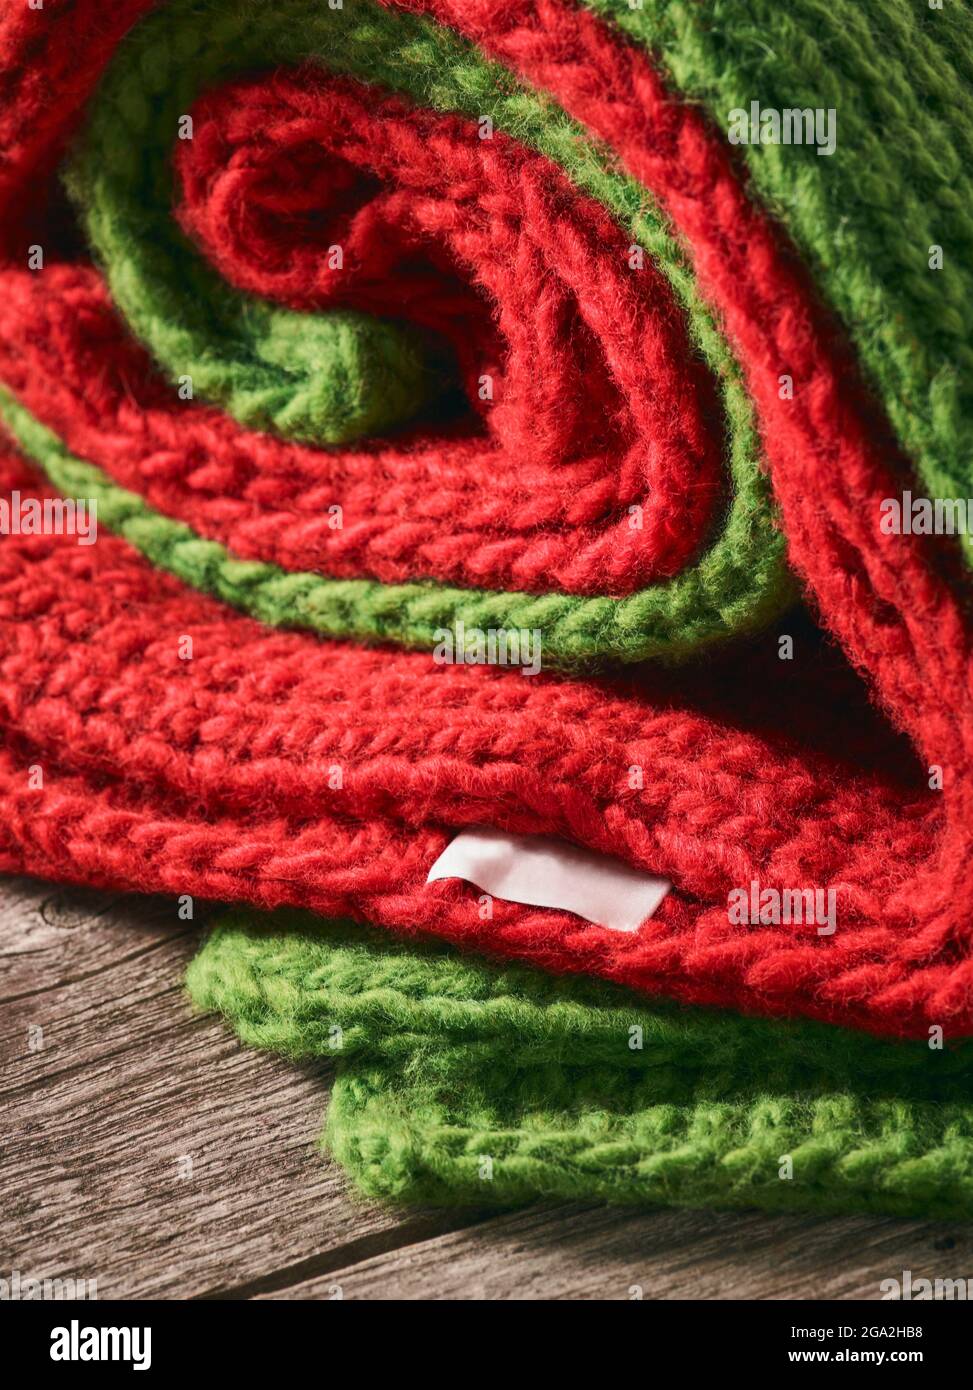 Close-up of a red and green knitted garments folded together and laying on a wooden table; Studio Stock Photo